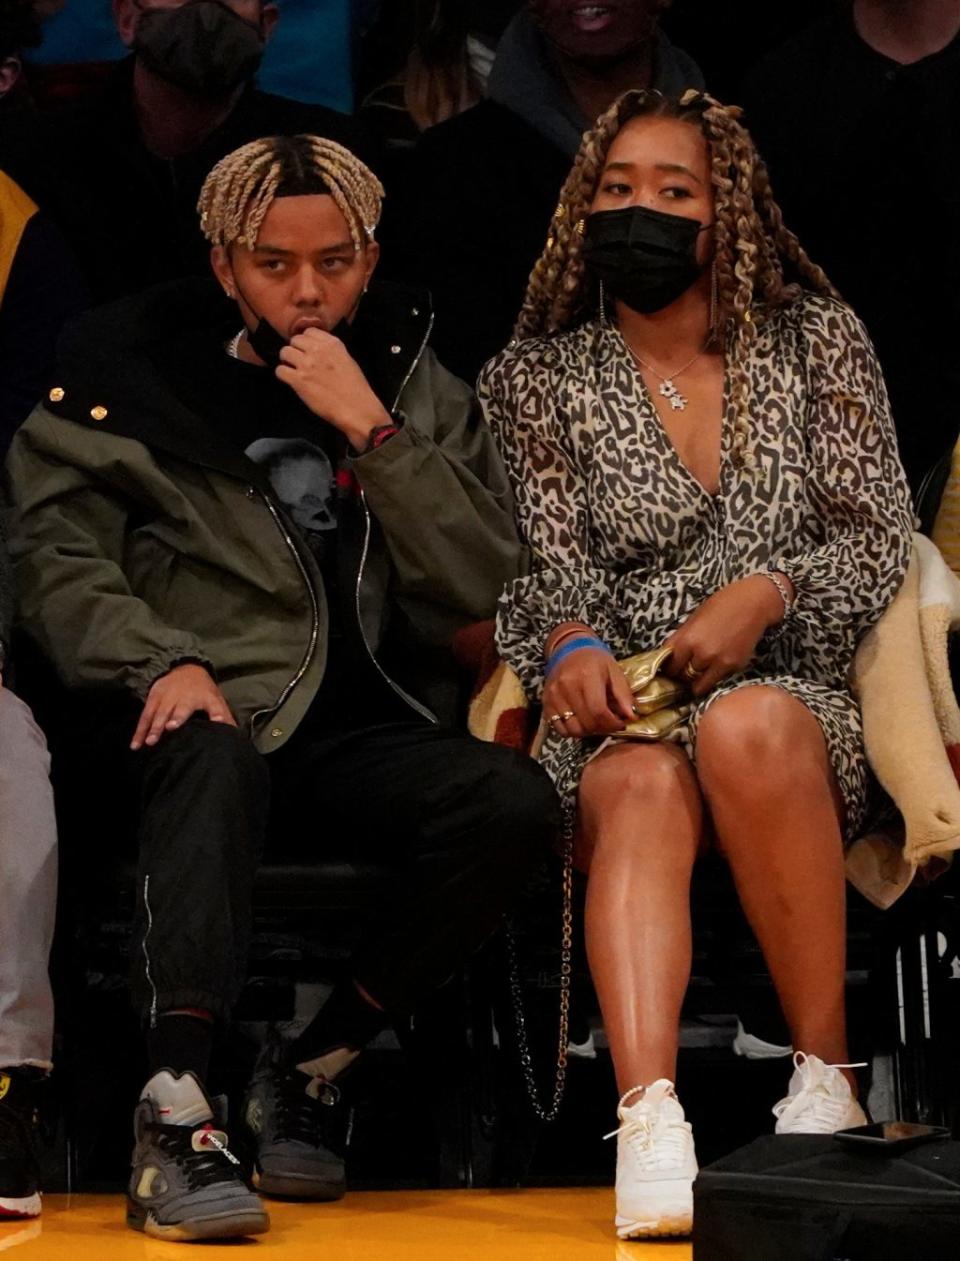 Naomi Osaka with boyfriend and rapper Cordae at Los Angeles Lakers game on Dec. 21, 2021. - Credit: London Entertainment / SplashNews.com